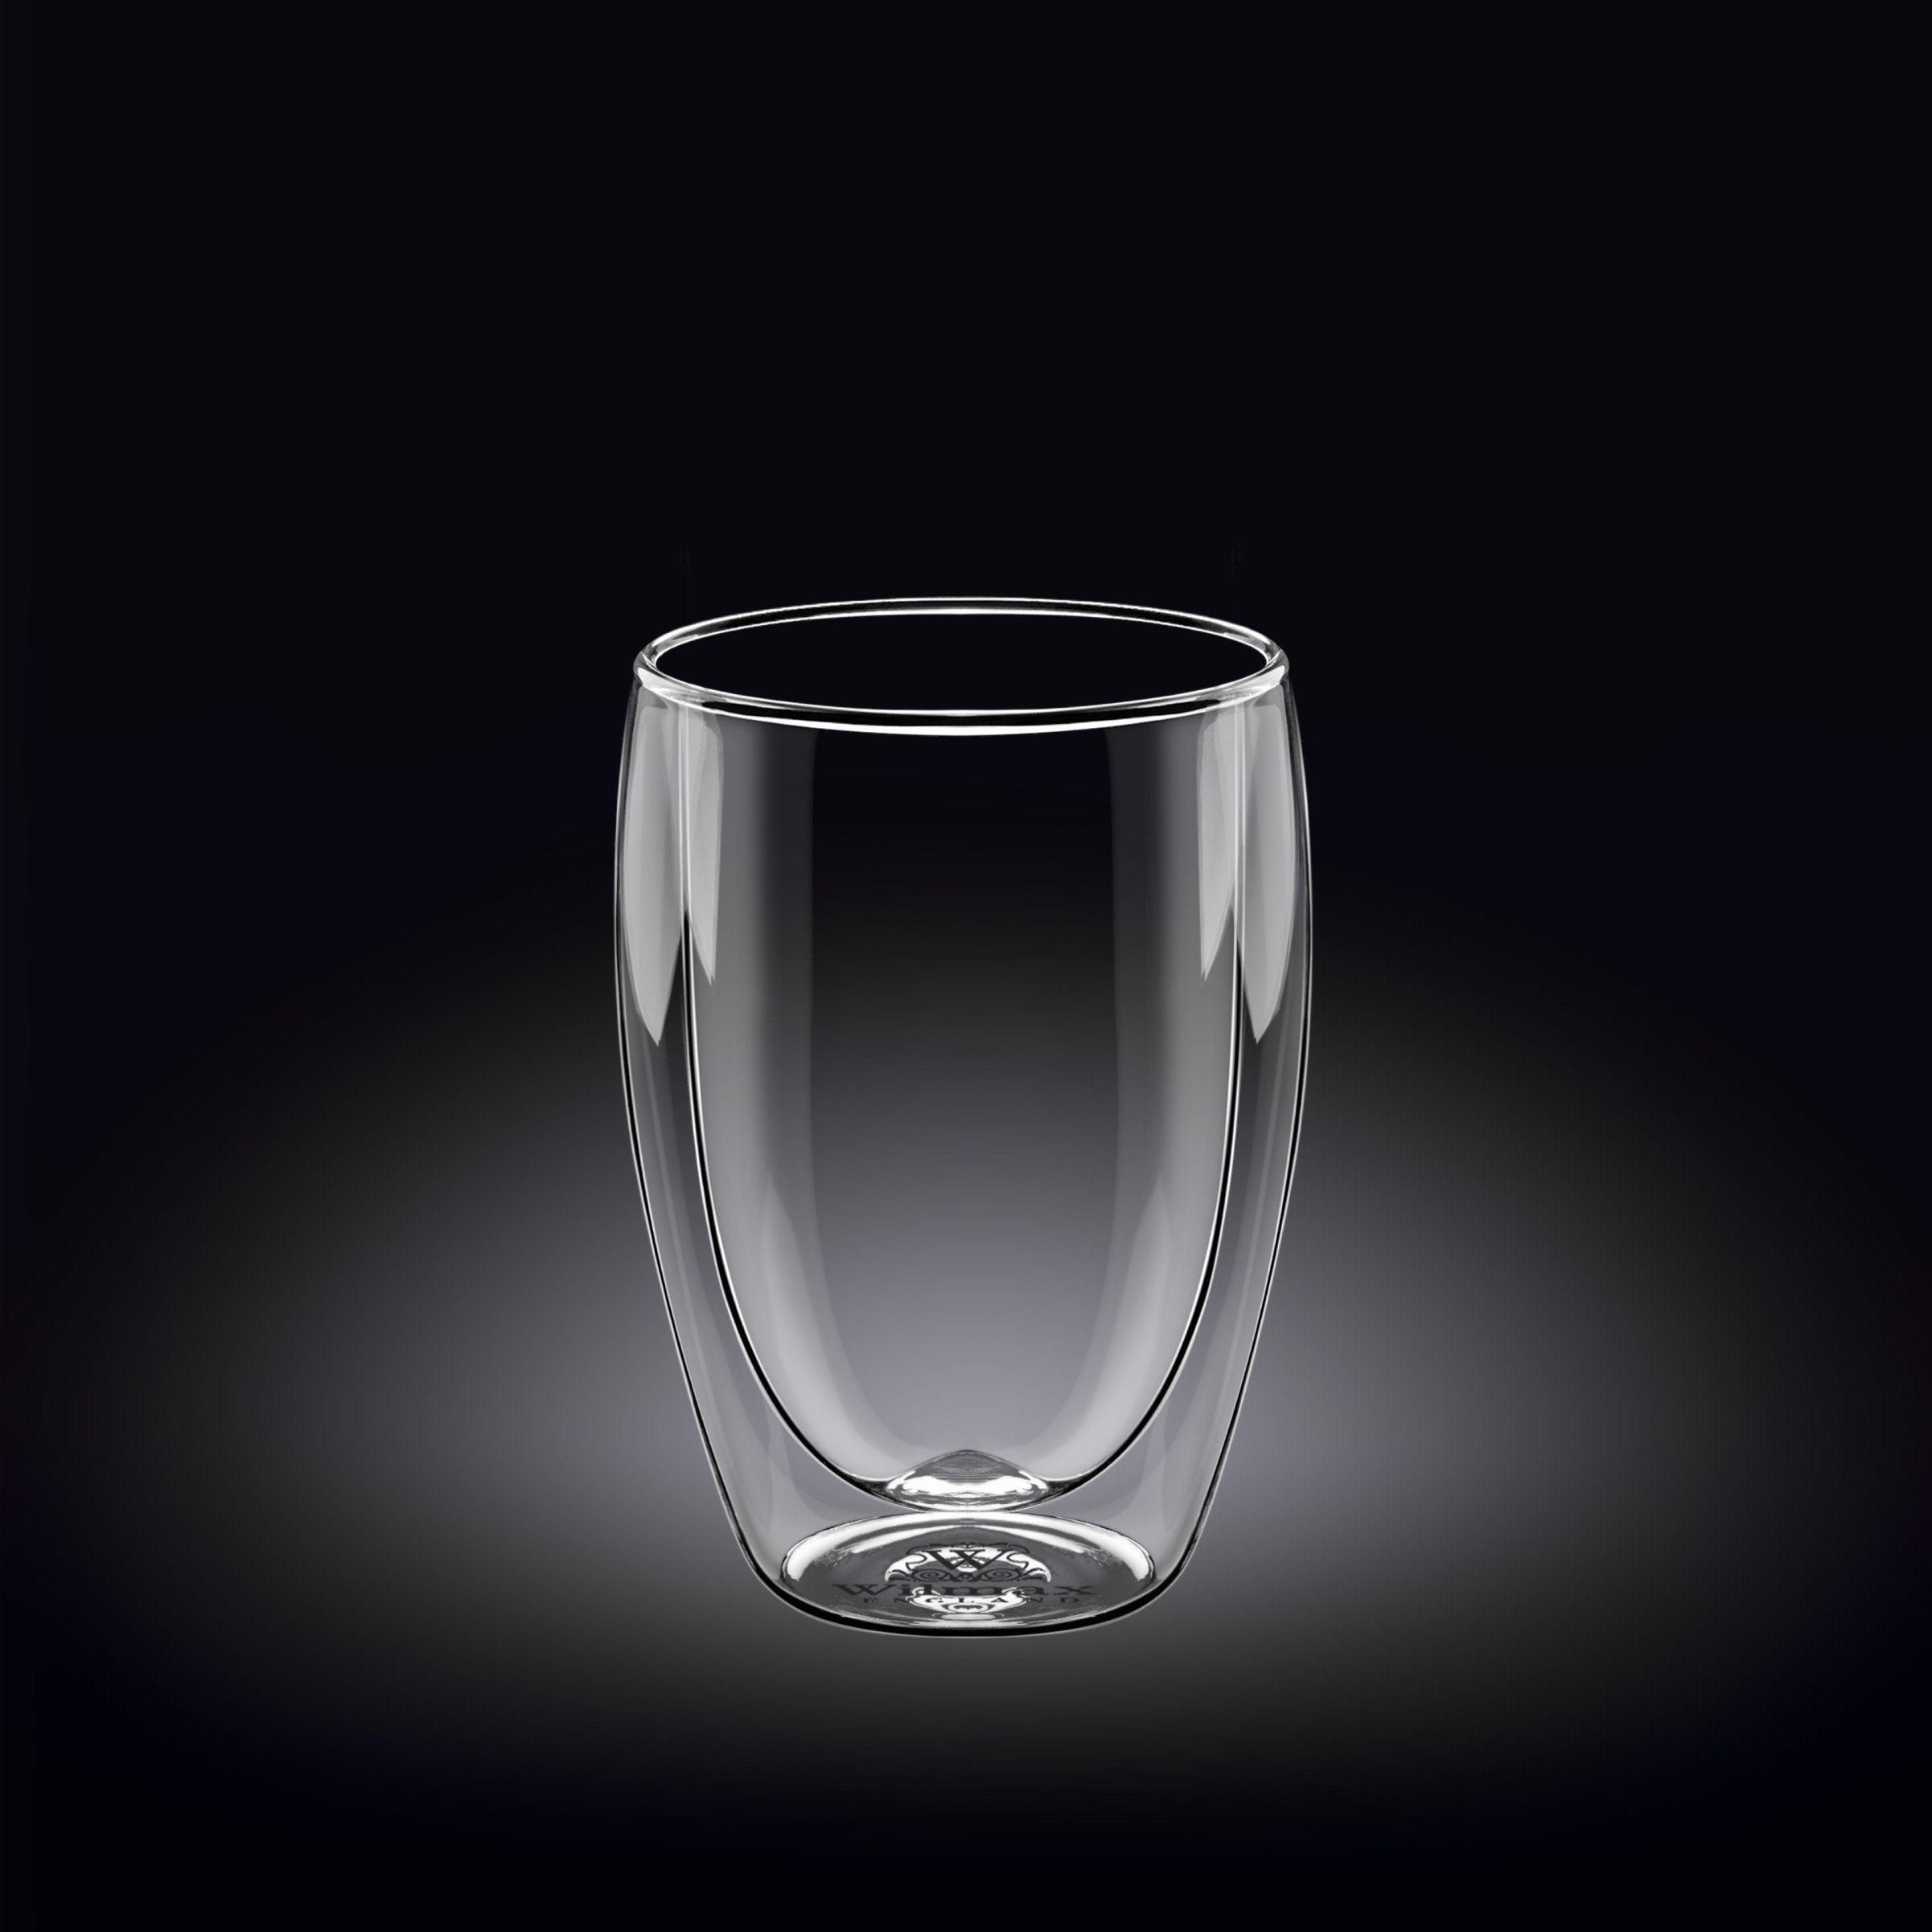 Unleash elegance & effortless serving with our Double-Wall Thermo Glass (250ml)! It keeps drinks hot or cold, is crafted for durability, & features a stylish design. Perfect for beverages & desserts. Shop now & elevate your tableware!